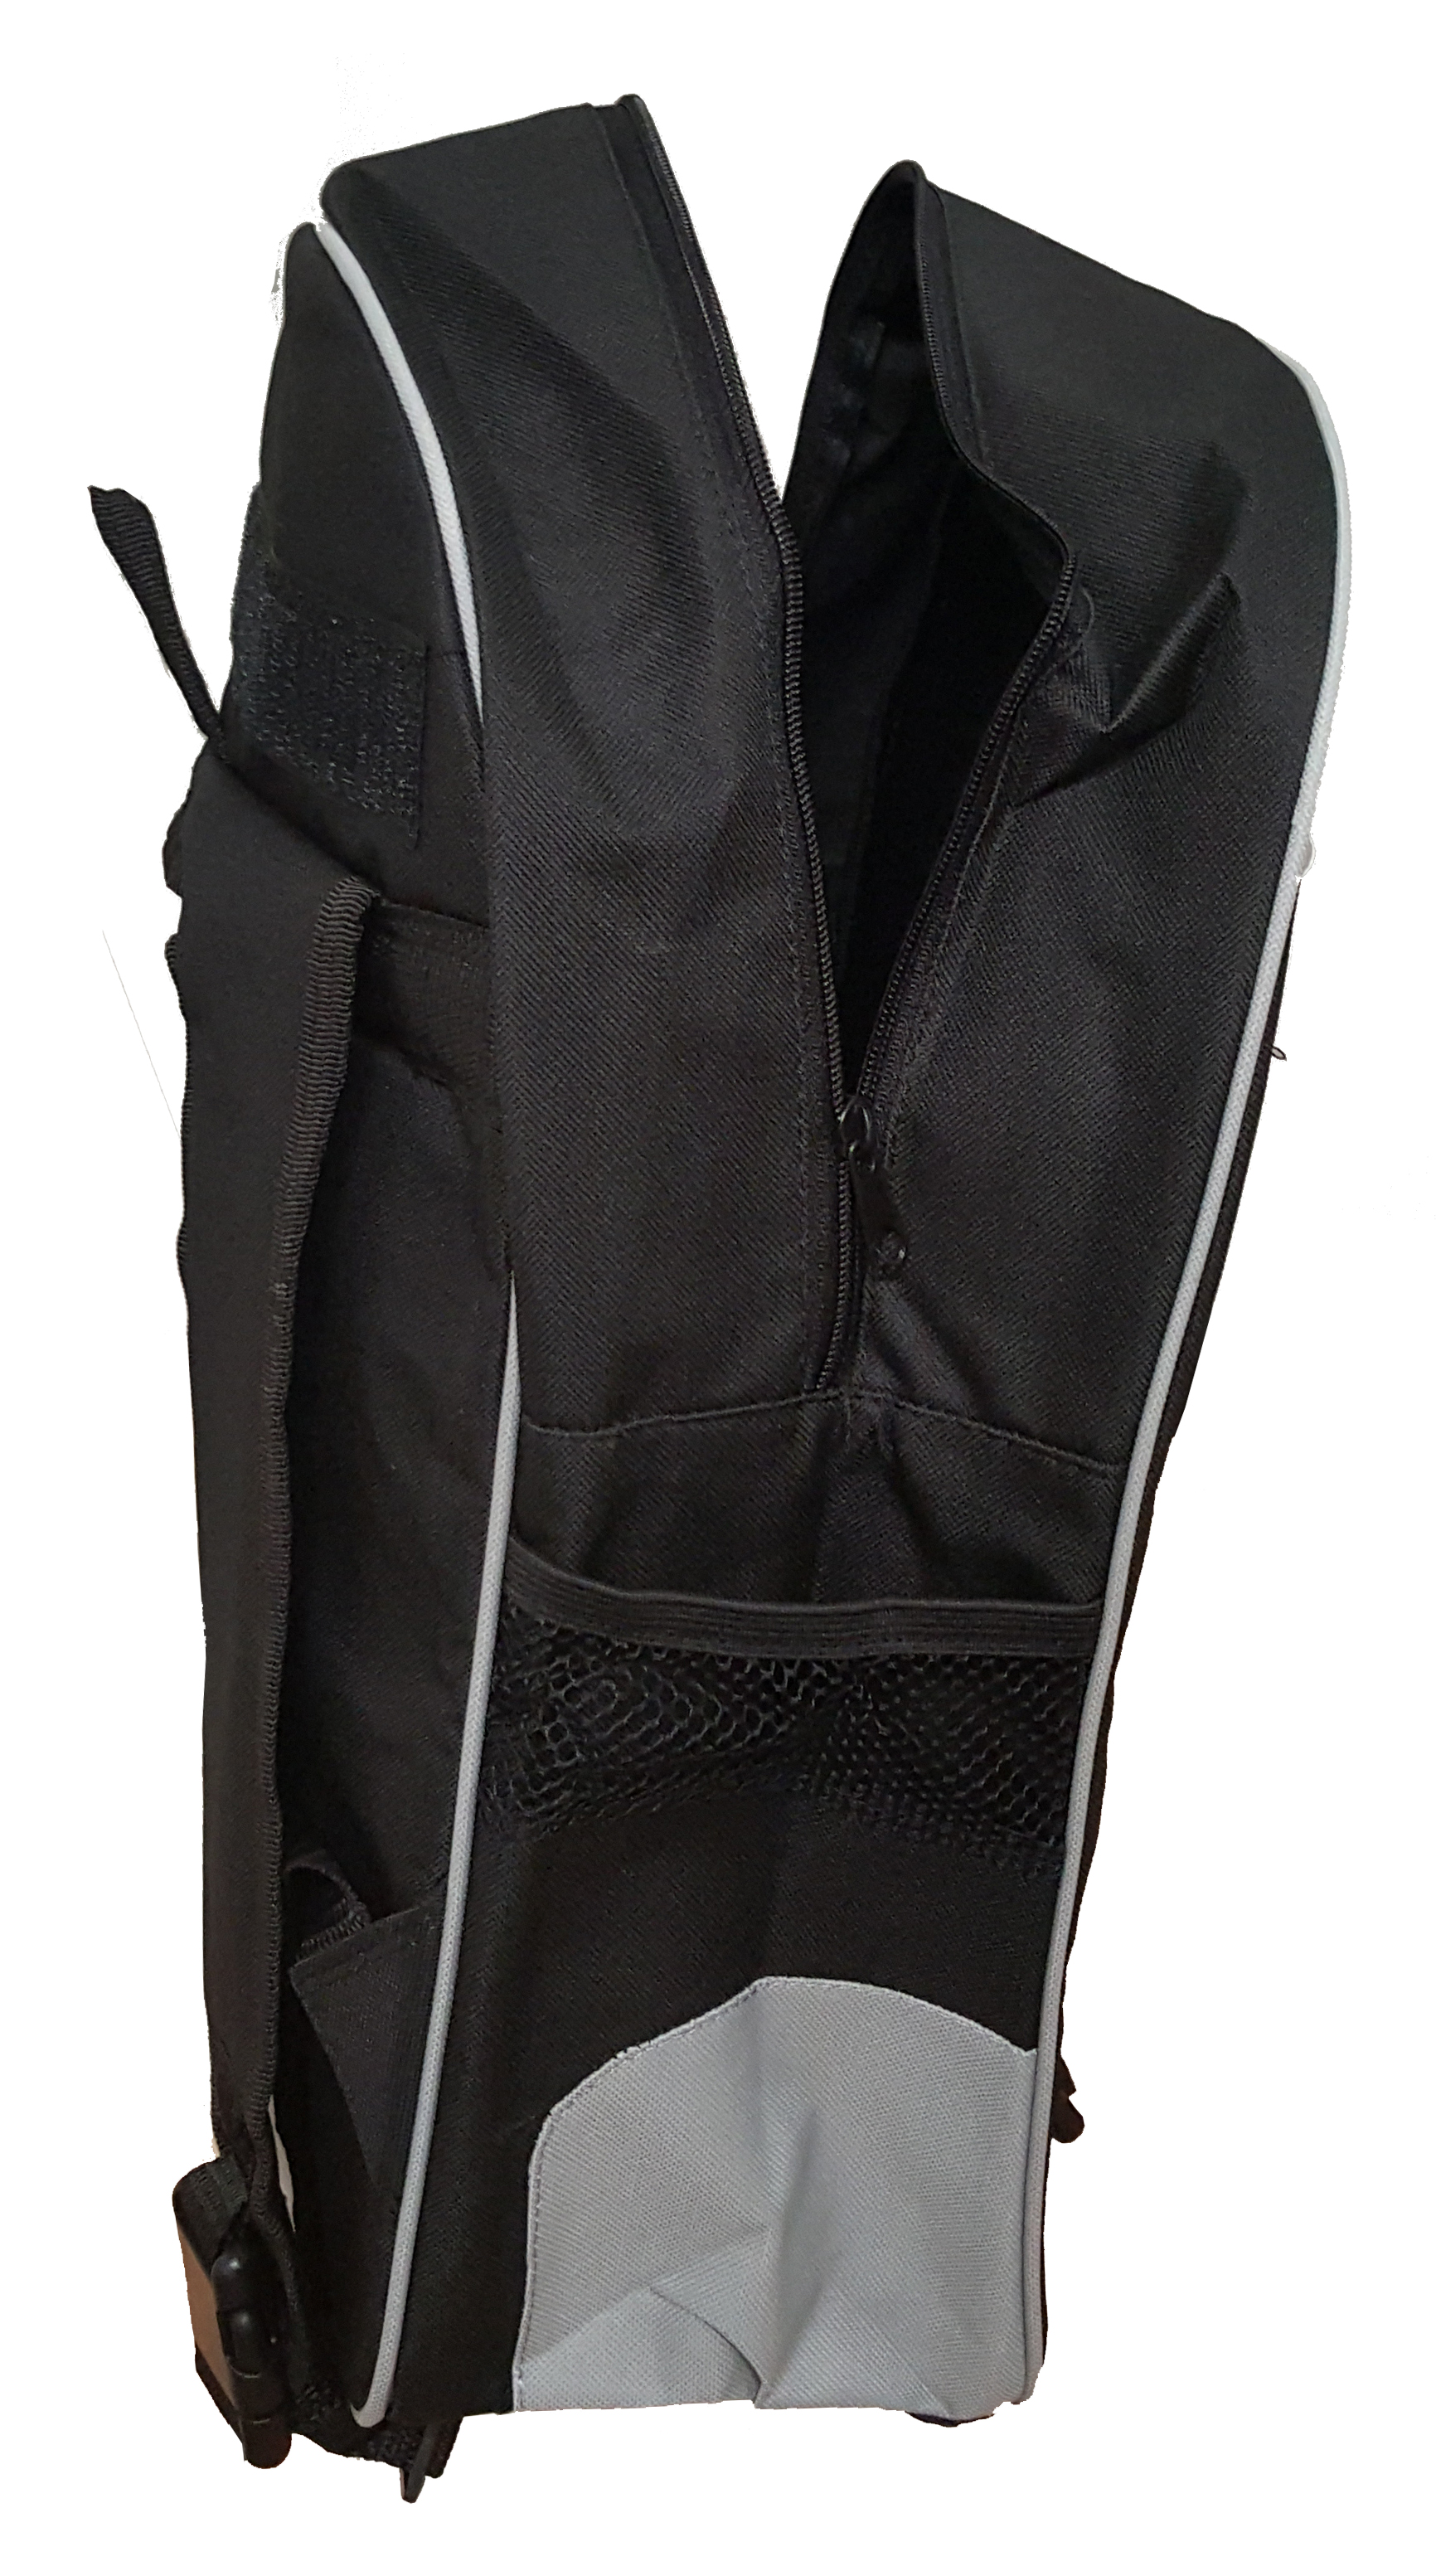 Collection of School Backpacks in Black - Choose From 28 Styles - image 3 of 3